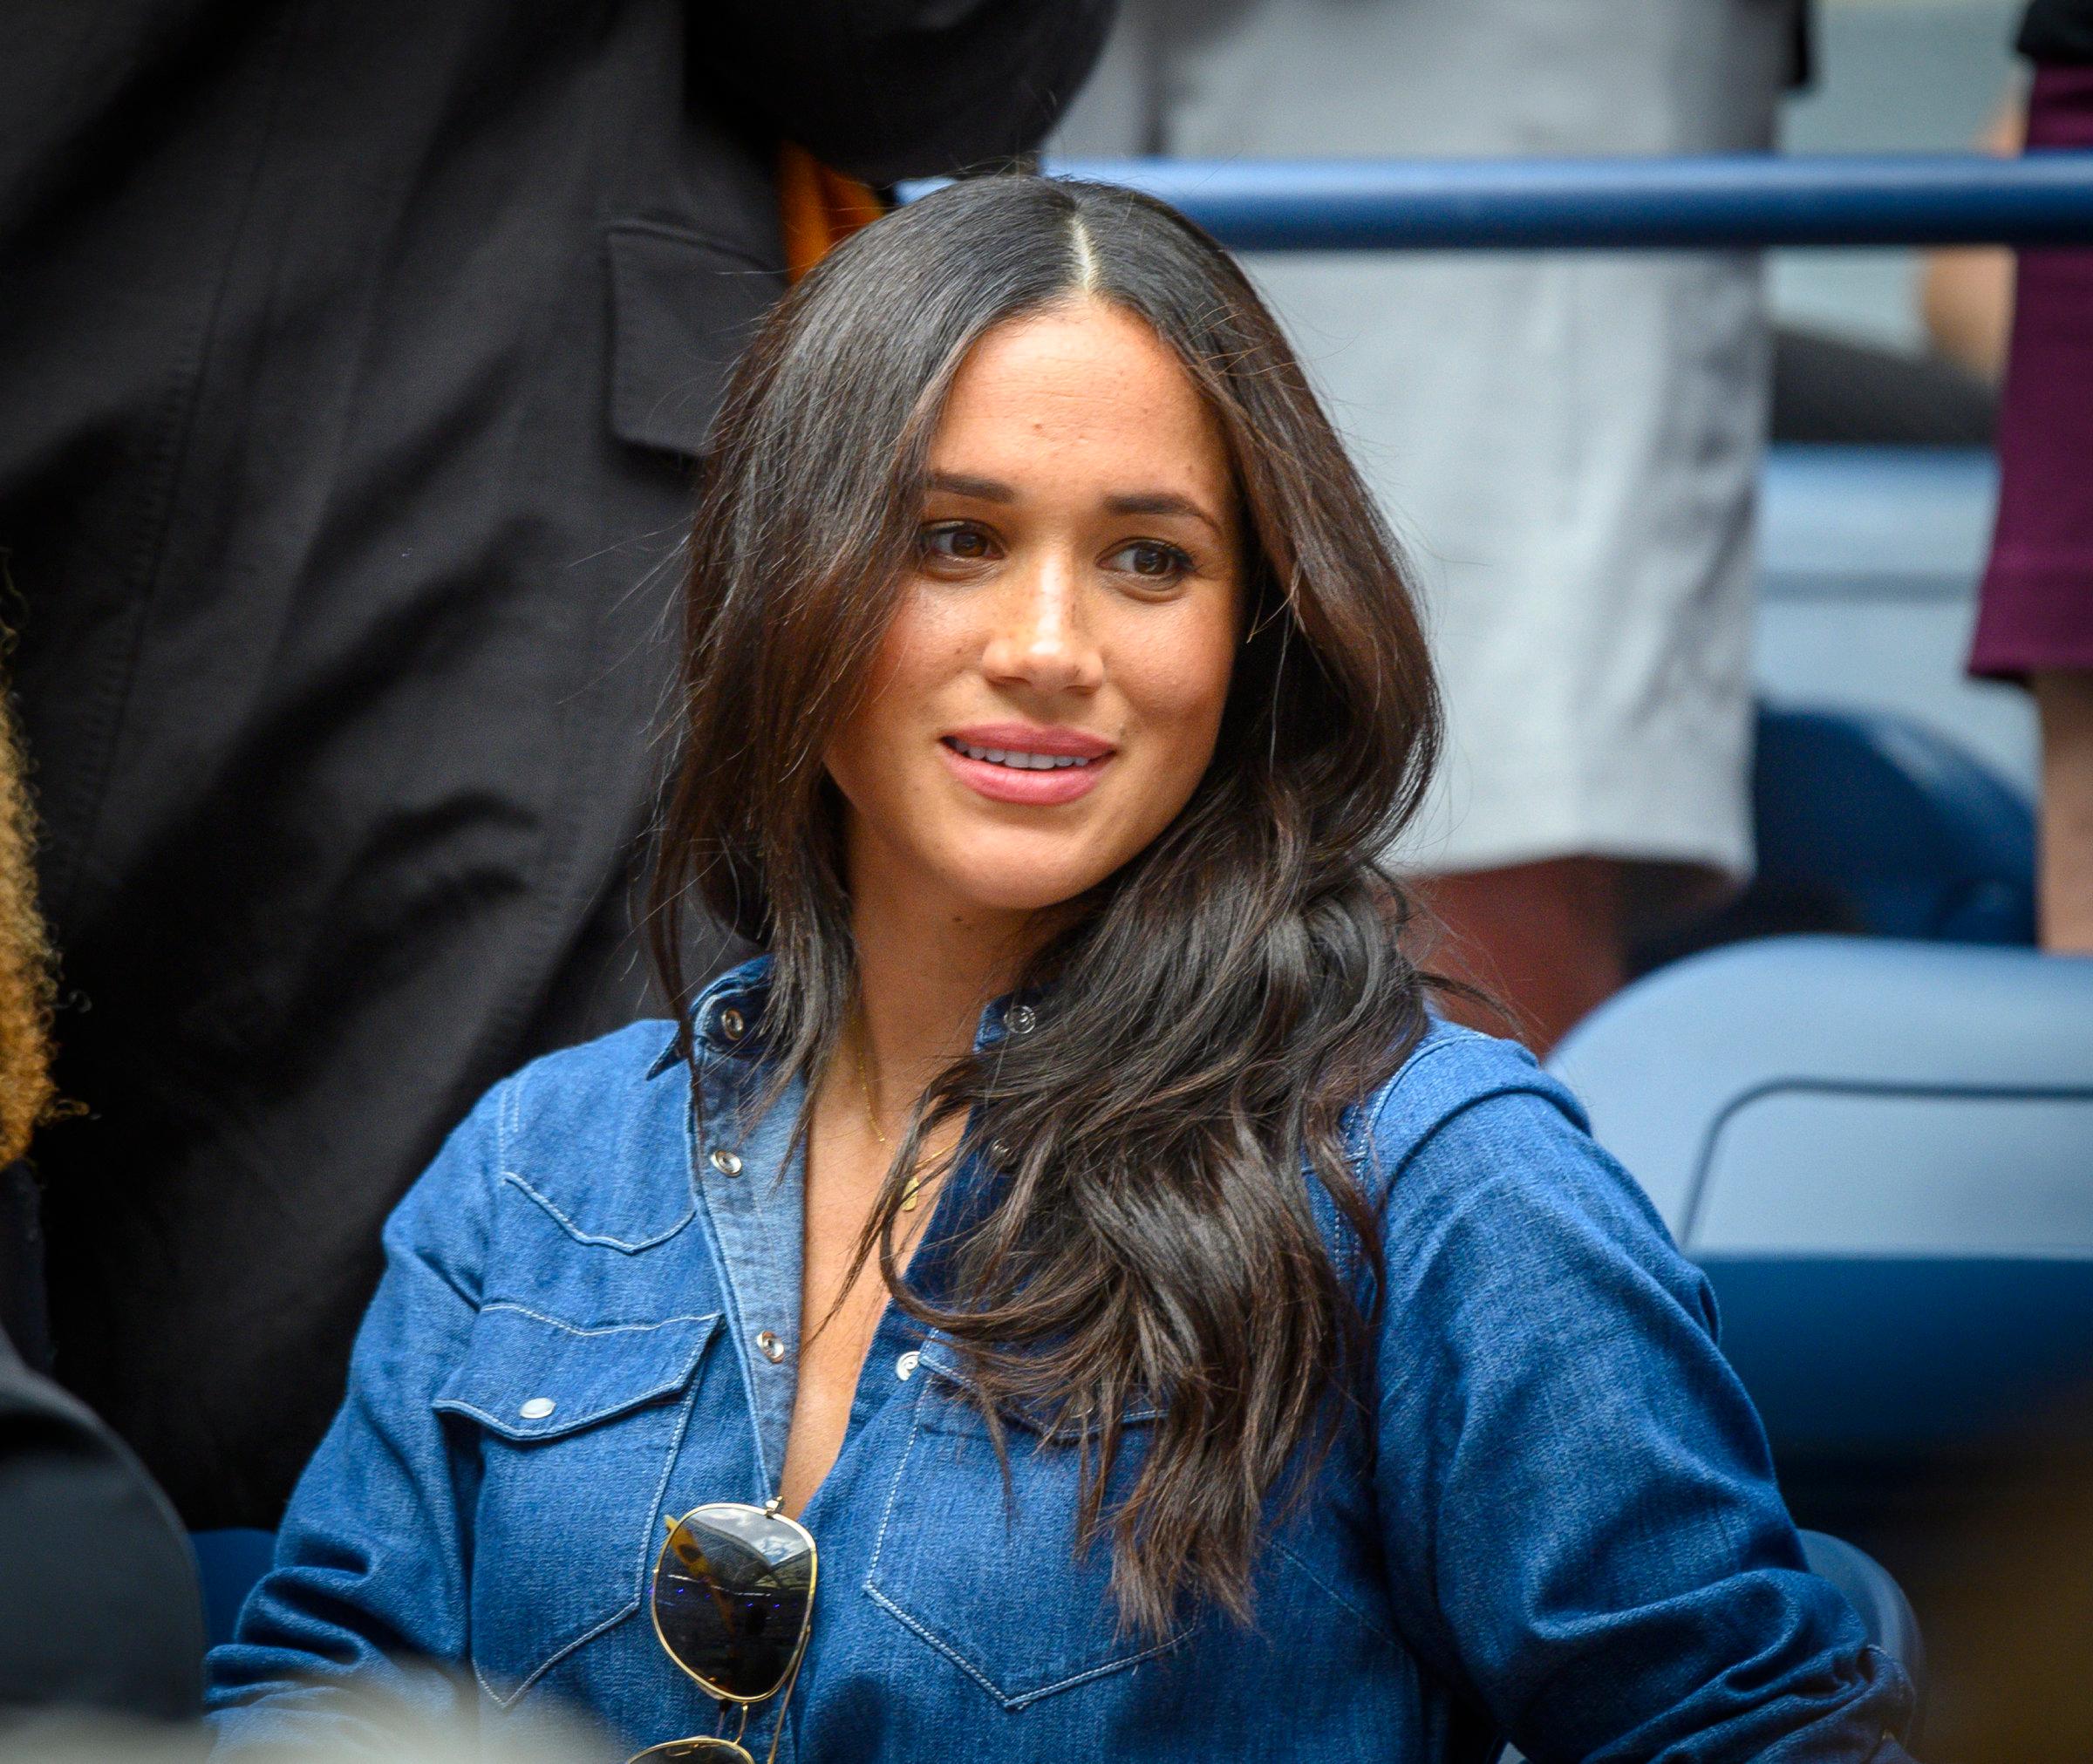 Meghan Markle, who has battled migraines, in Serena Williams' box during a tennis match 